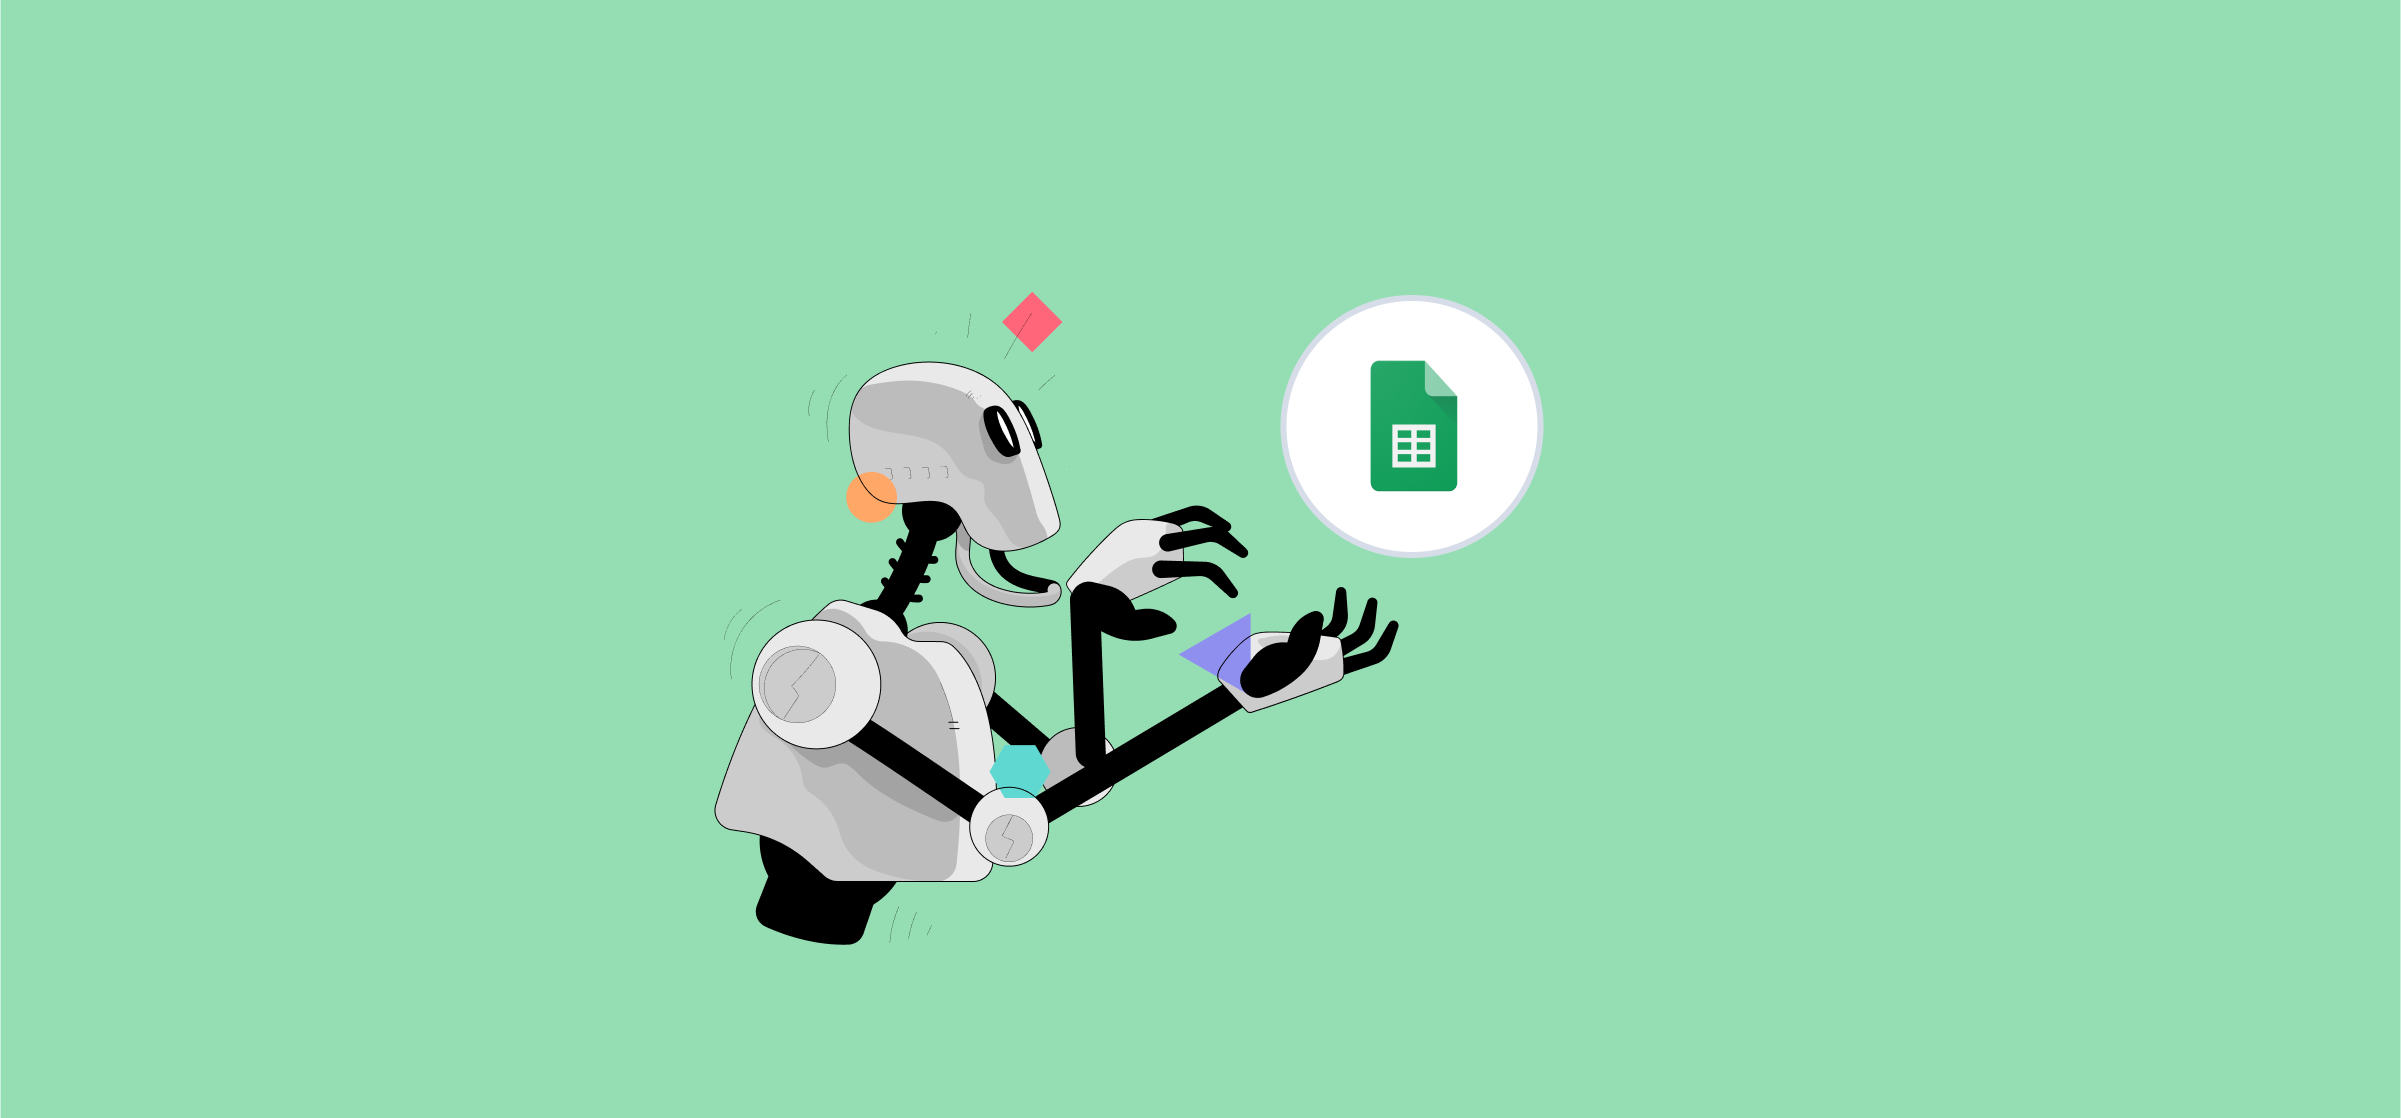 An illustration of a robot with a logo for Google Sheets, representing automations.